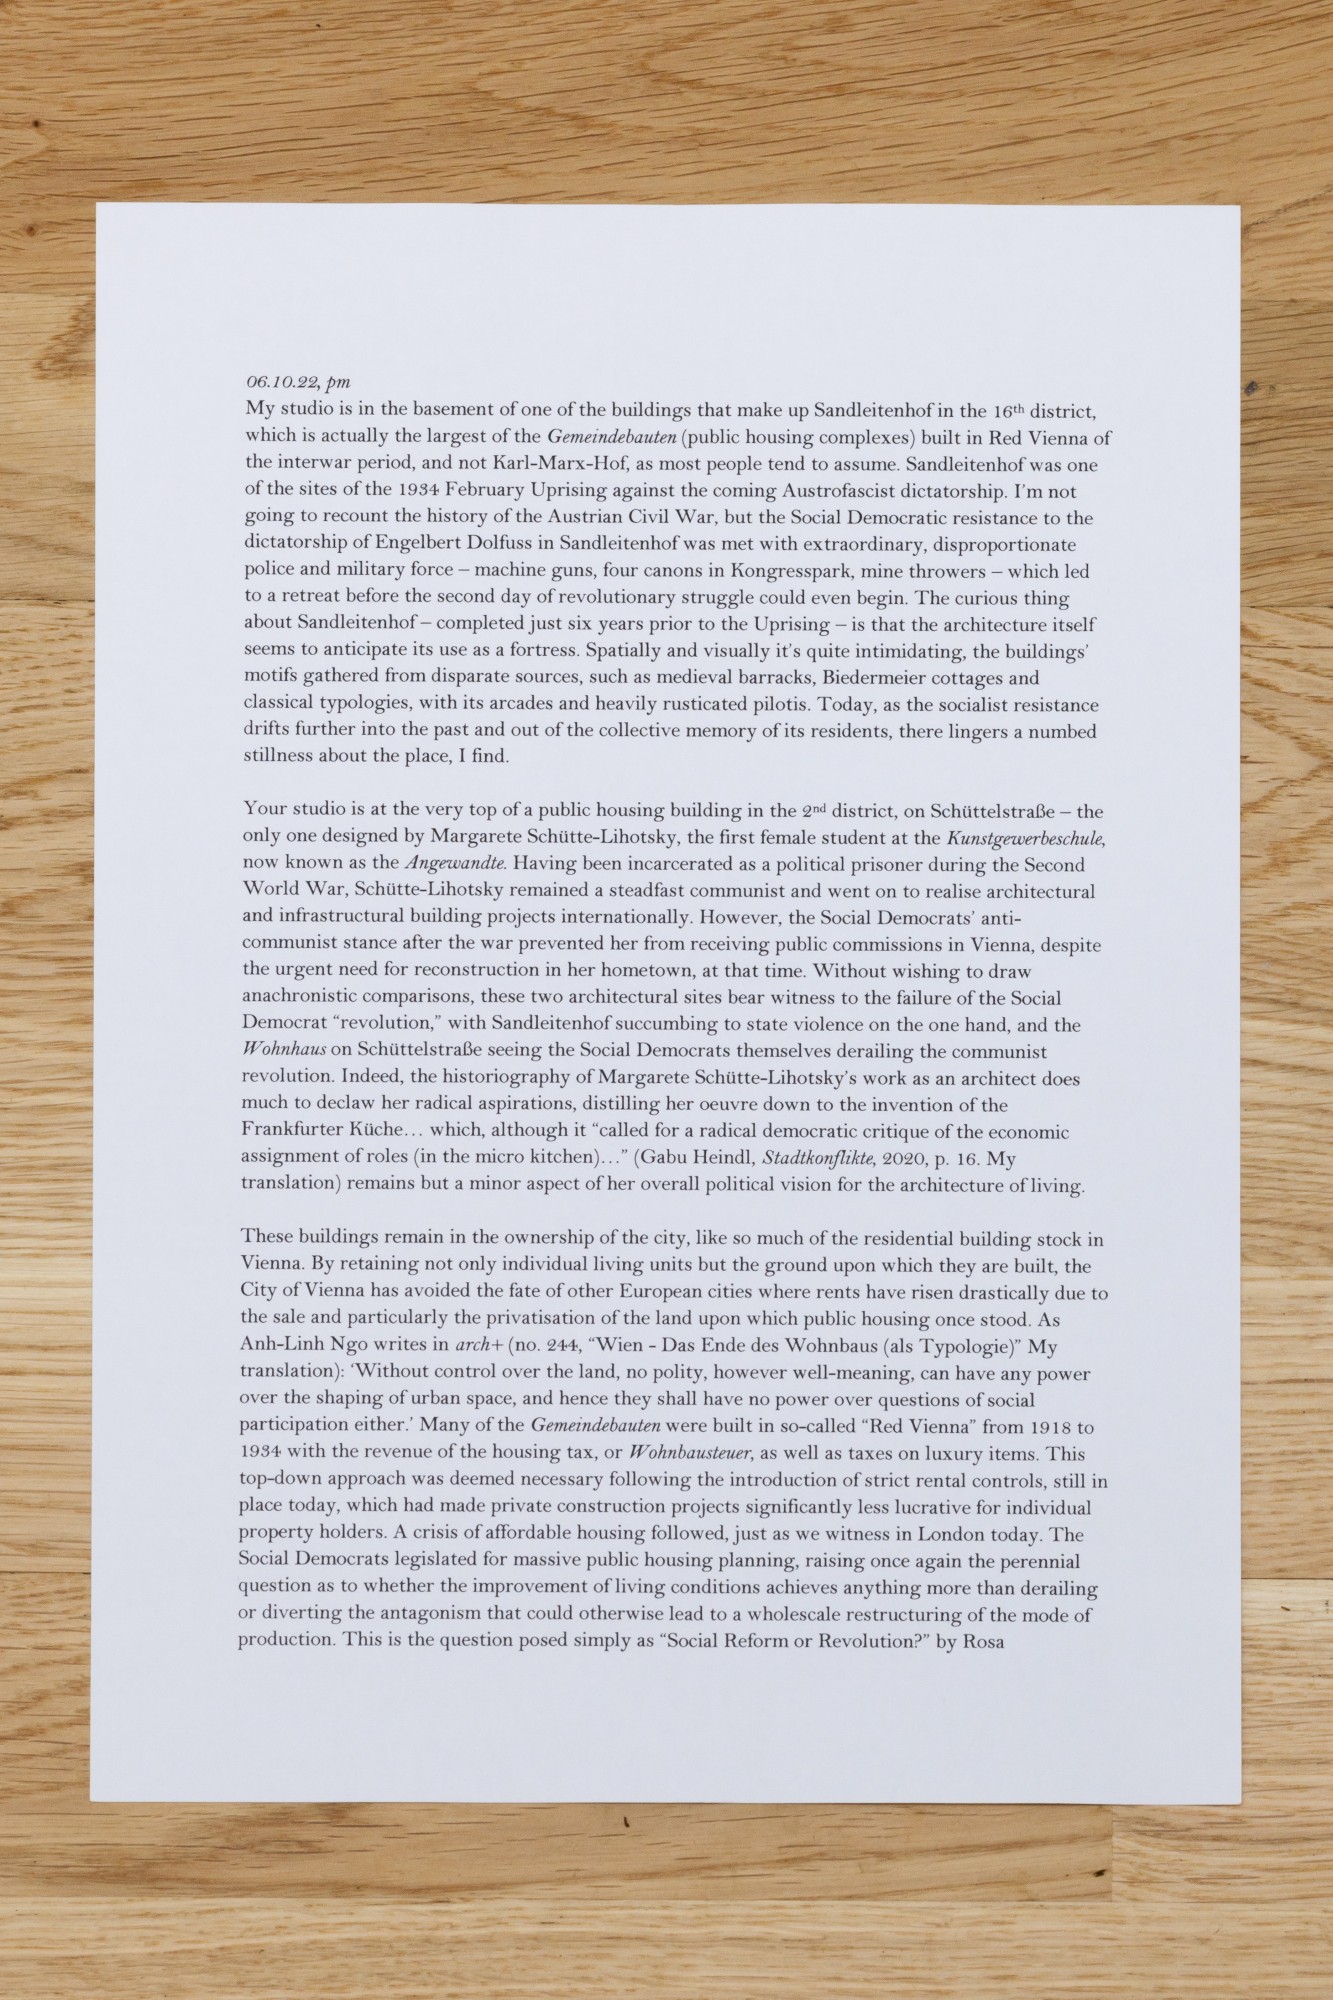 Miriam Stoney, Textual Situation (Too Many Words), 2022